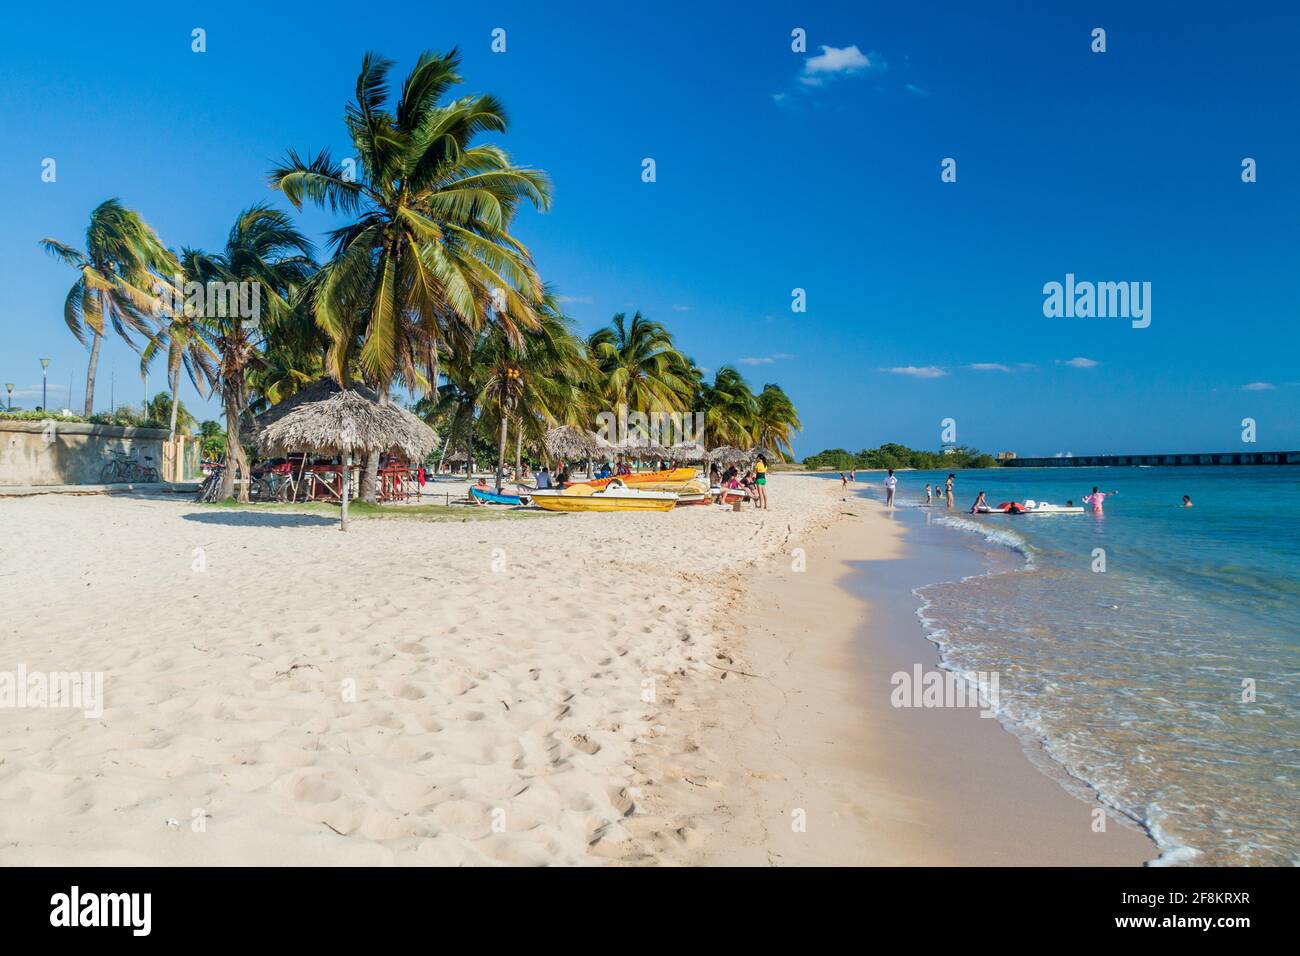 PLAYA GIRON, CUBA - FEB 14, 2016: Tourists at the beach Playa Giron, Cuba. This beach is famous for its role during the Bay of Pigs invasion. Stock Photo